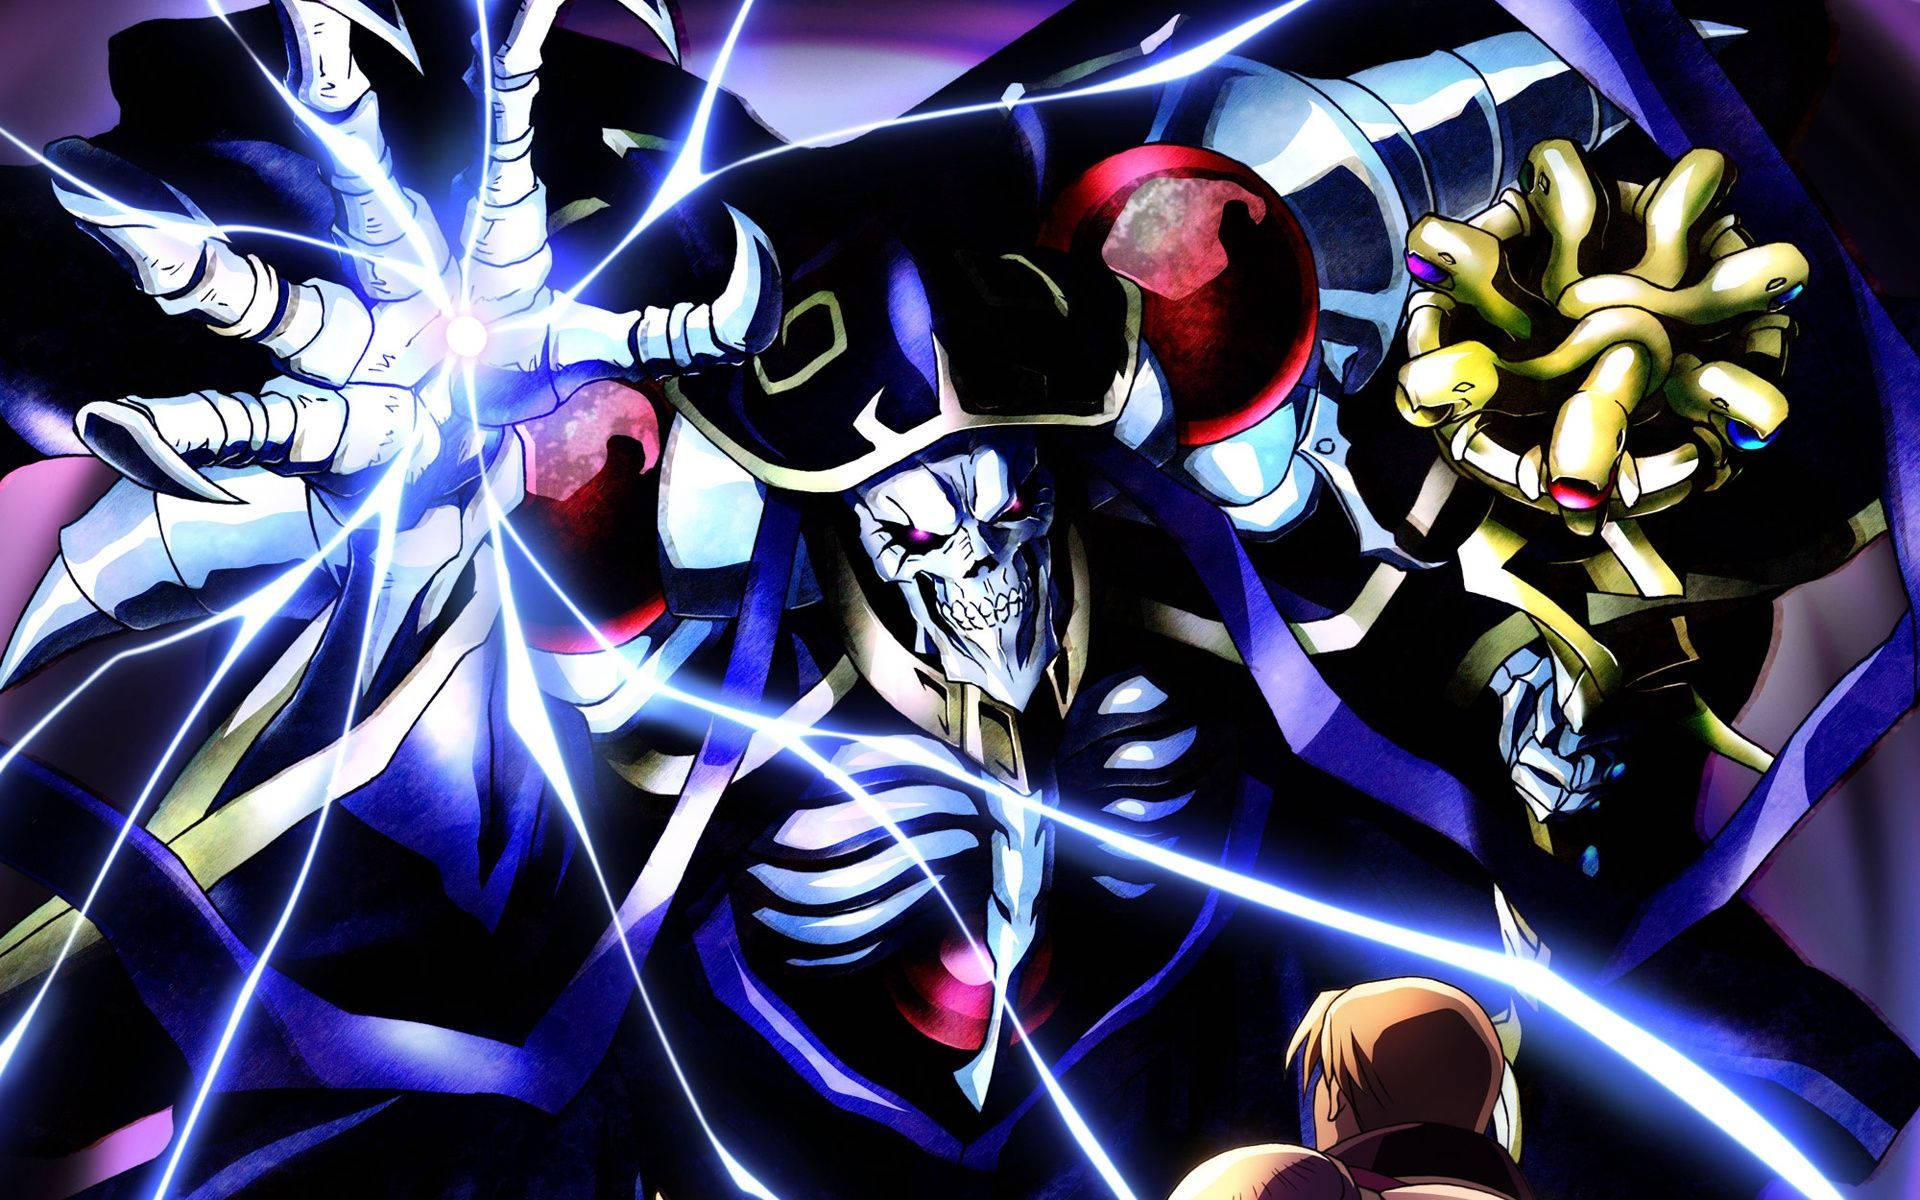 Ainz Oal Gown, the fearless leader of the Overlord army. Wallpaper